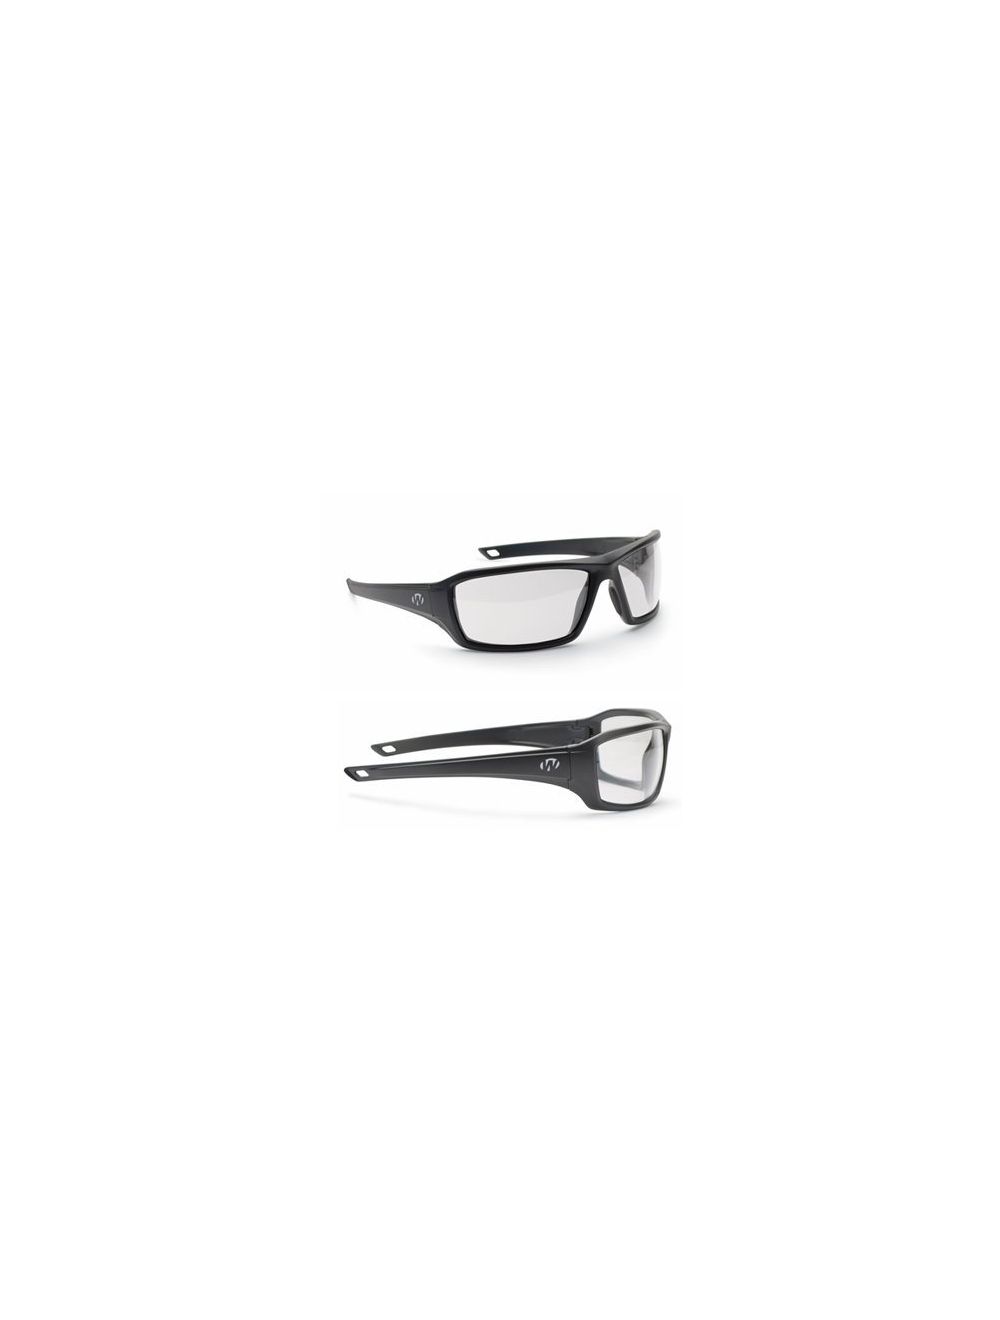 Forge Full Frame Shooting Glasses Clear